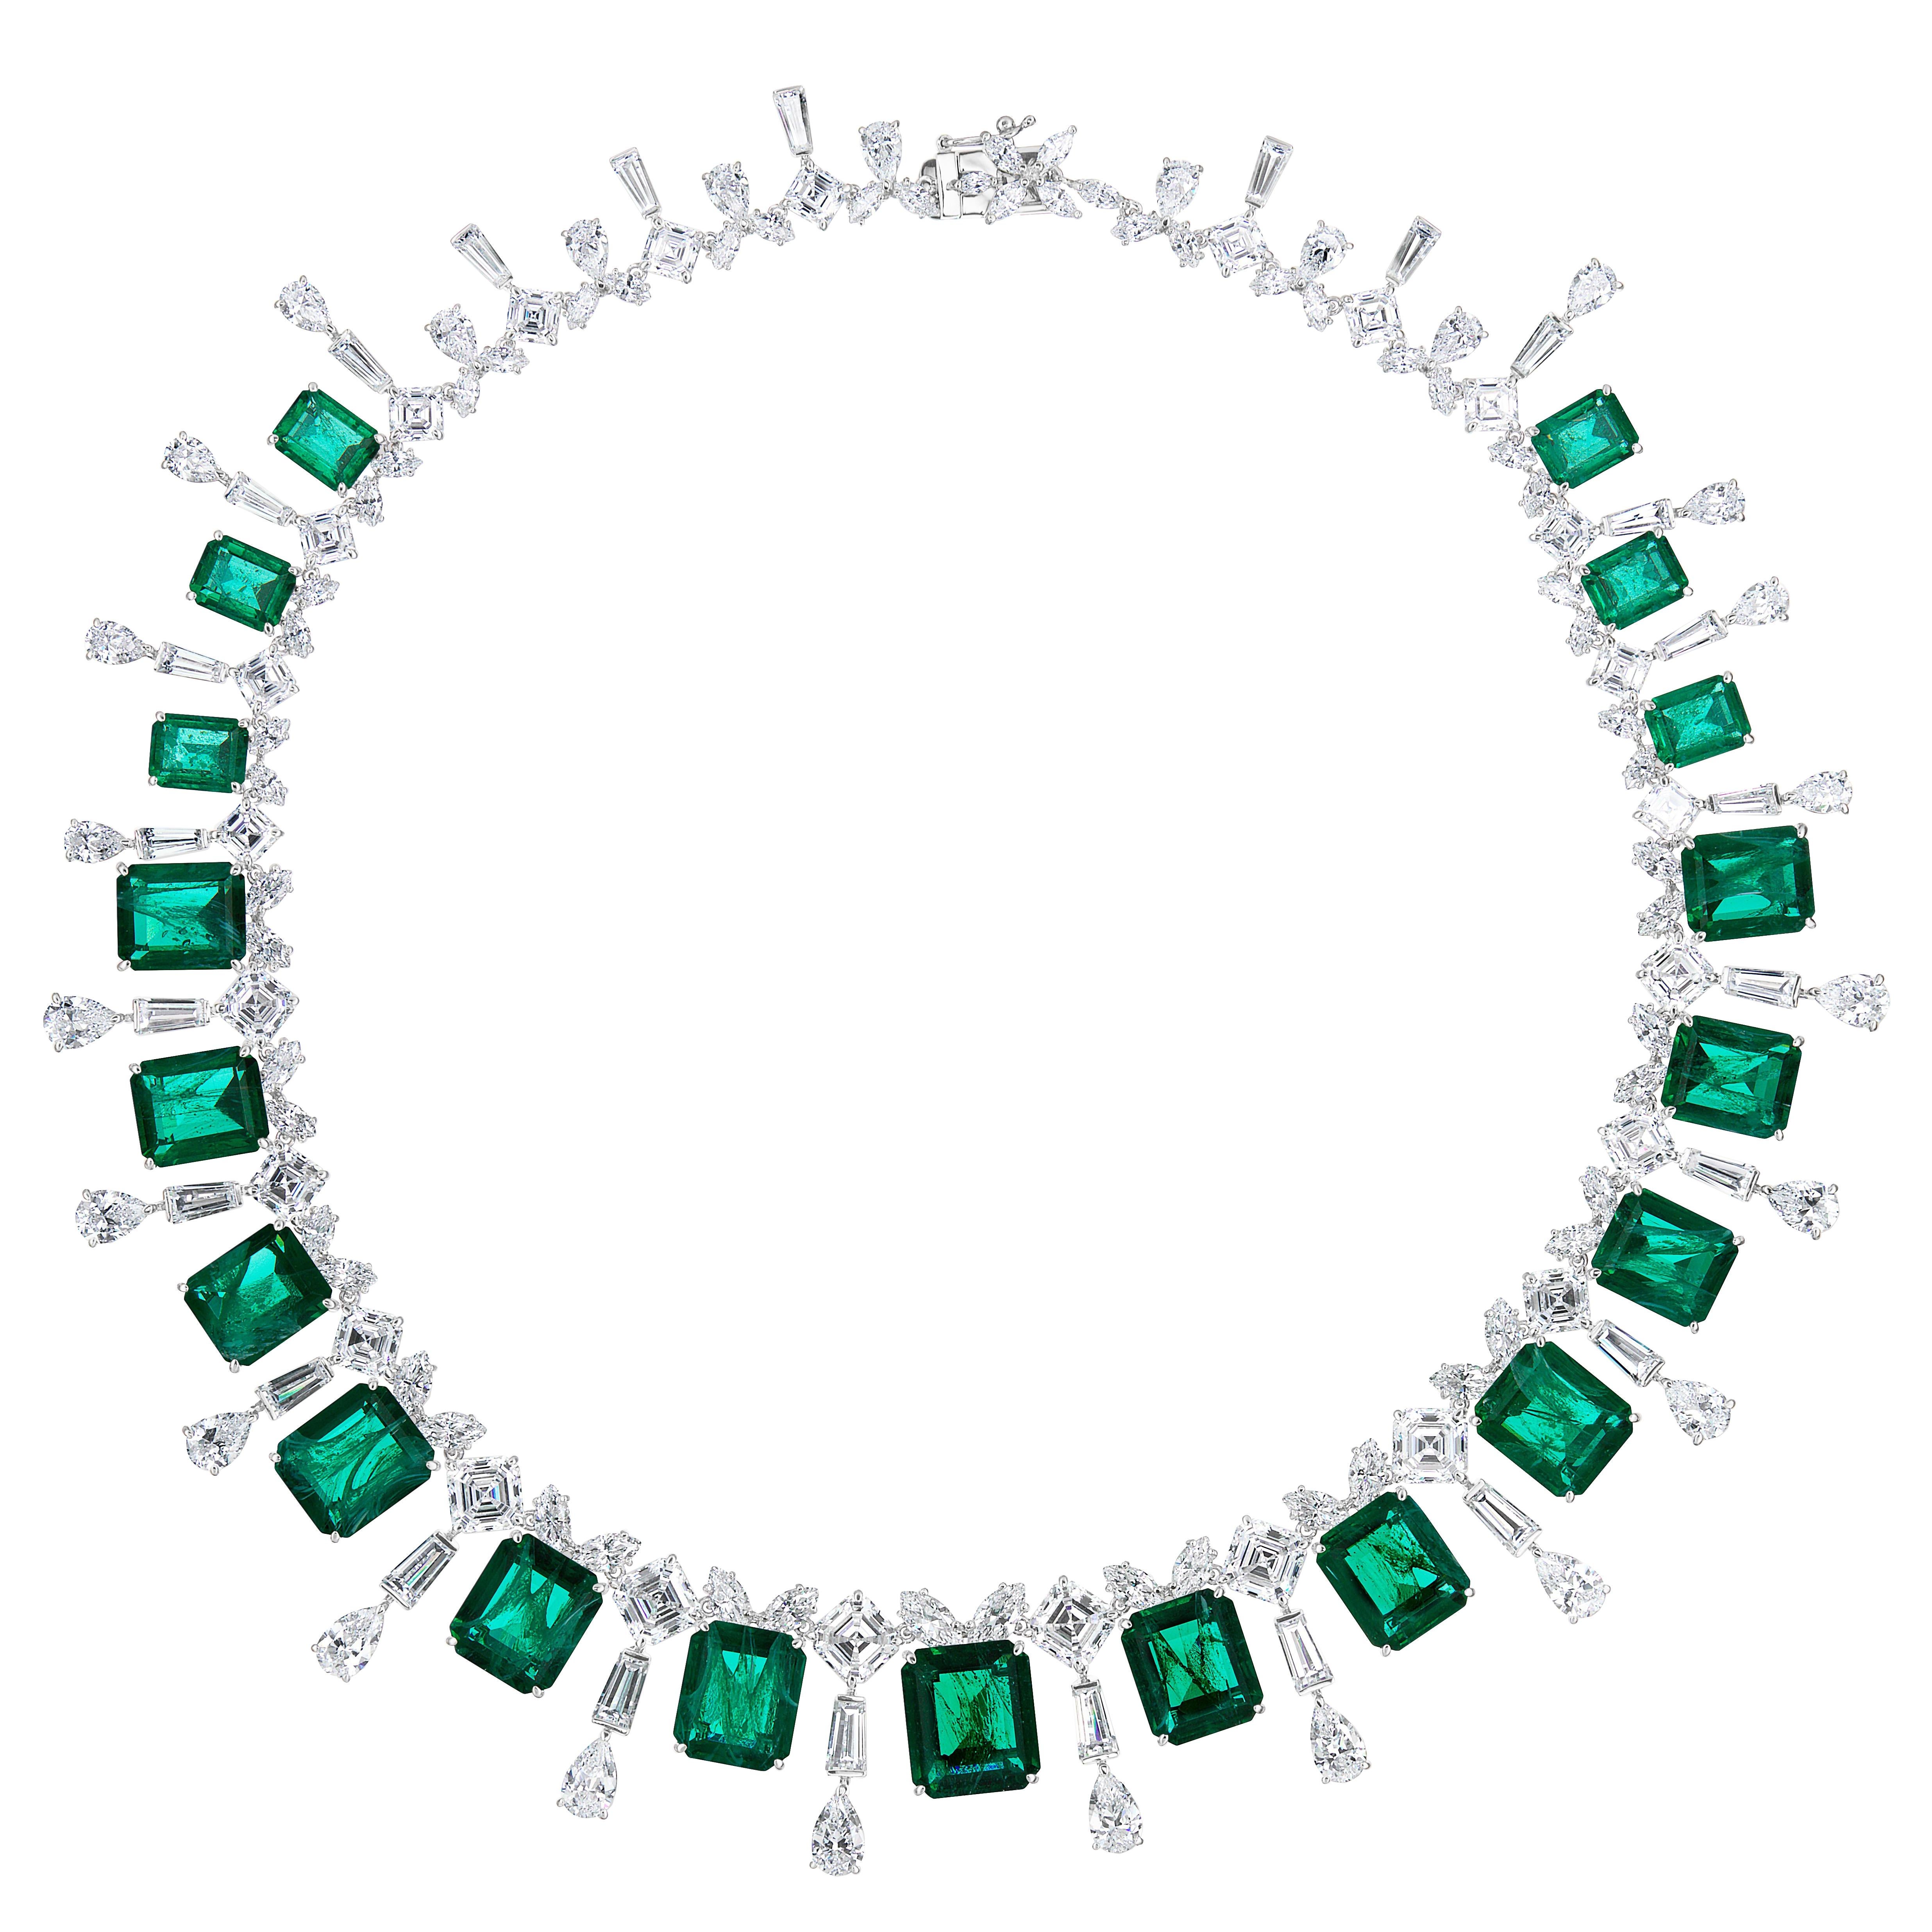 Real Looking Faux Emerald Cubic Zirconia Sterling 1950s Style Necklace